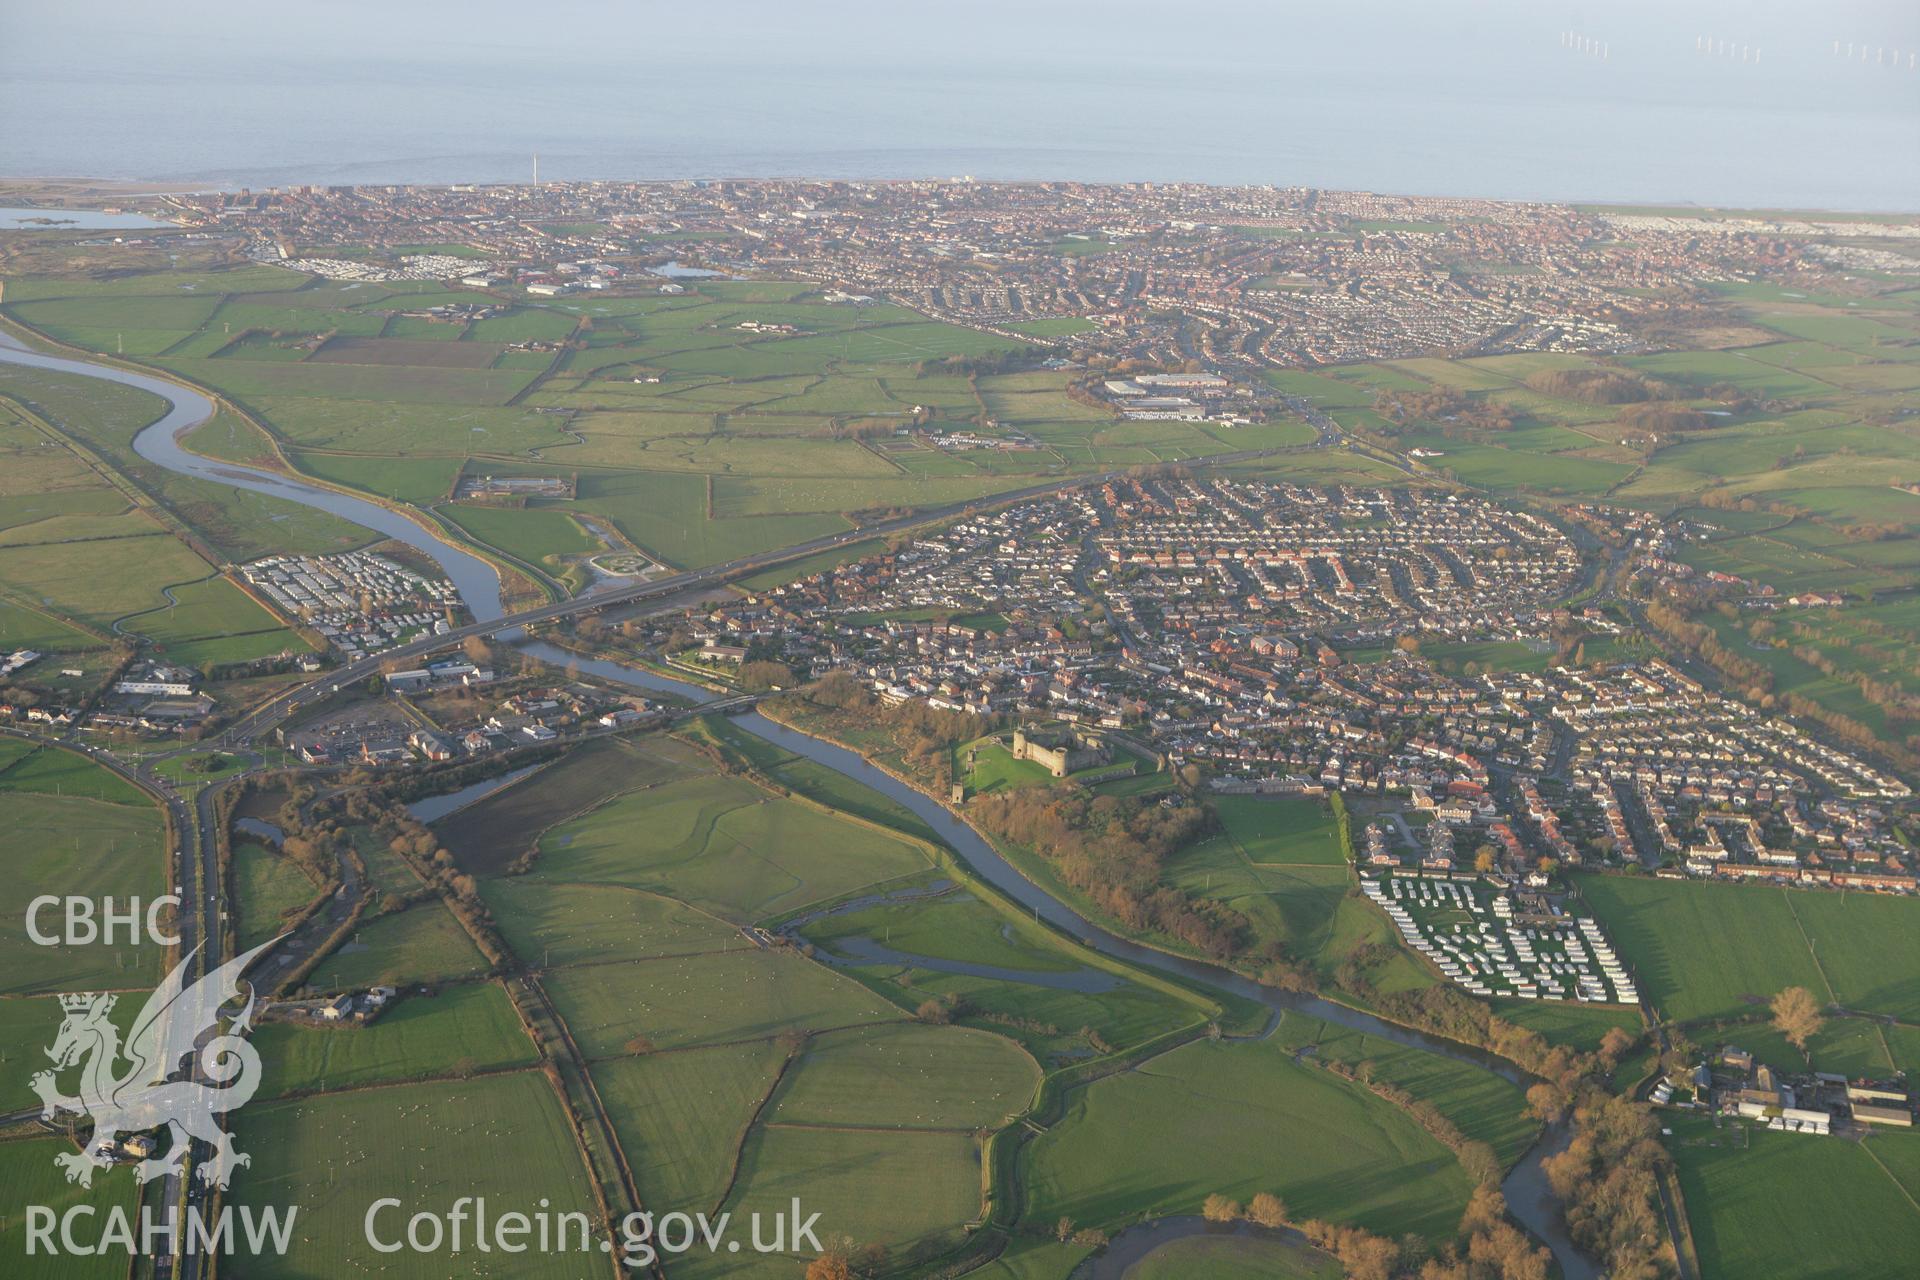 RCAHMW colour oblique aerial photograph of Rhuddlan and surrounding landscape. Taken on 10 December 2009 by Toby Driver